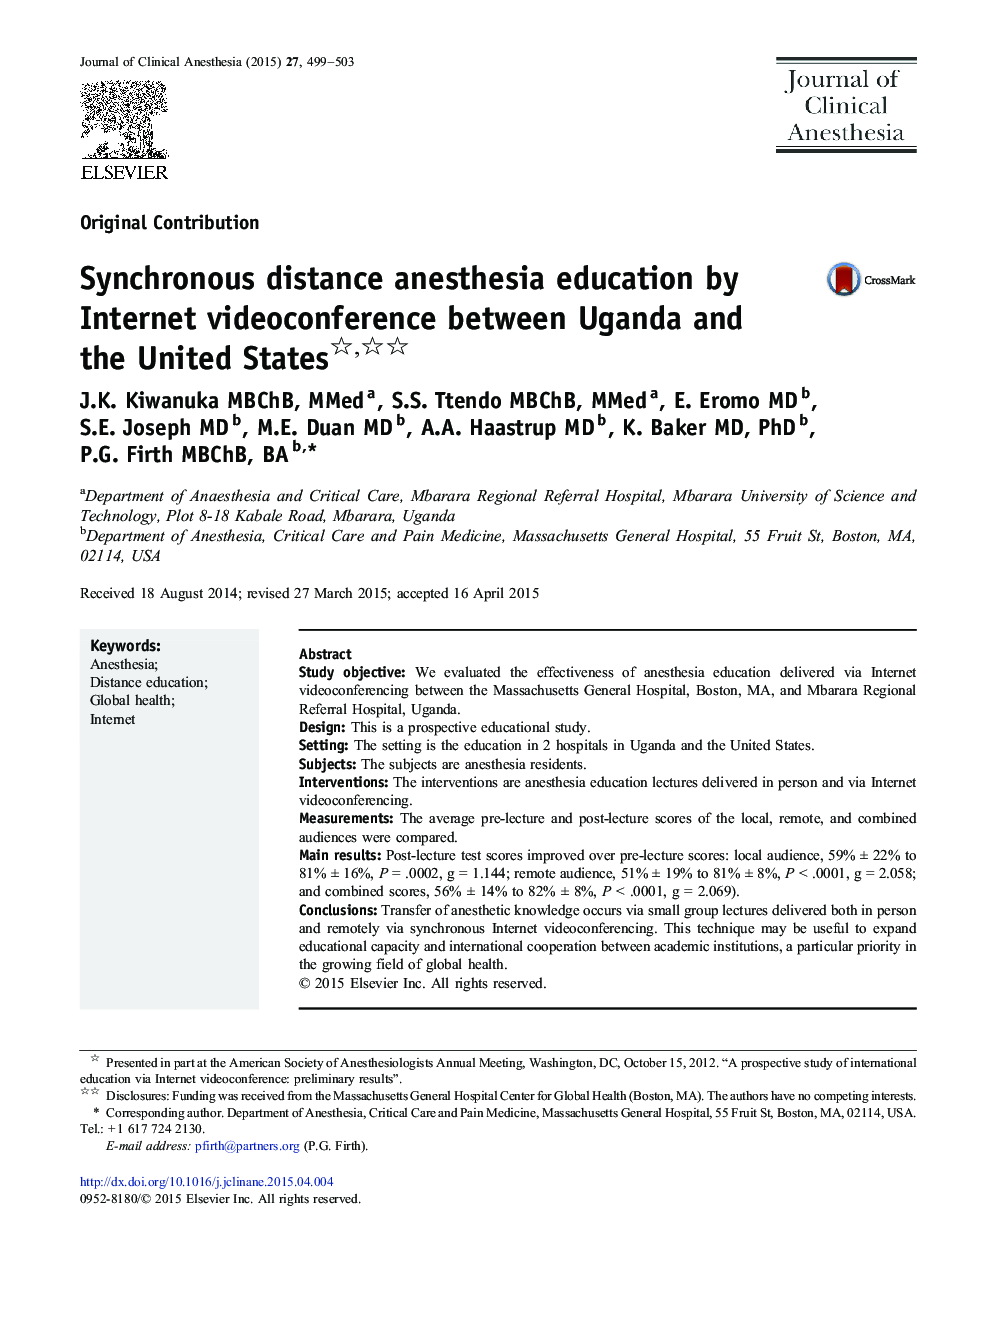 Synchronous distance anesthesia education by Internet videoconference between Uganda and the United States 